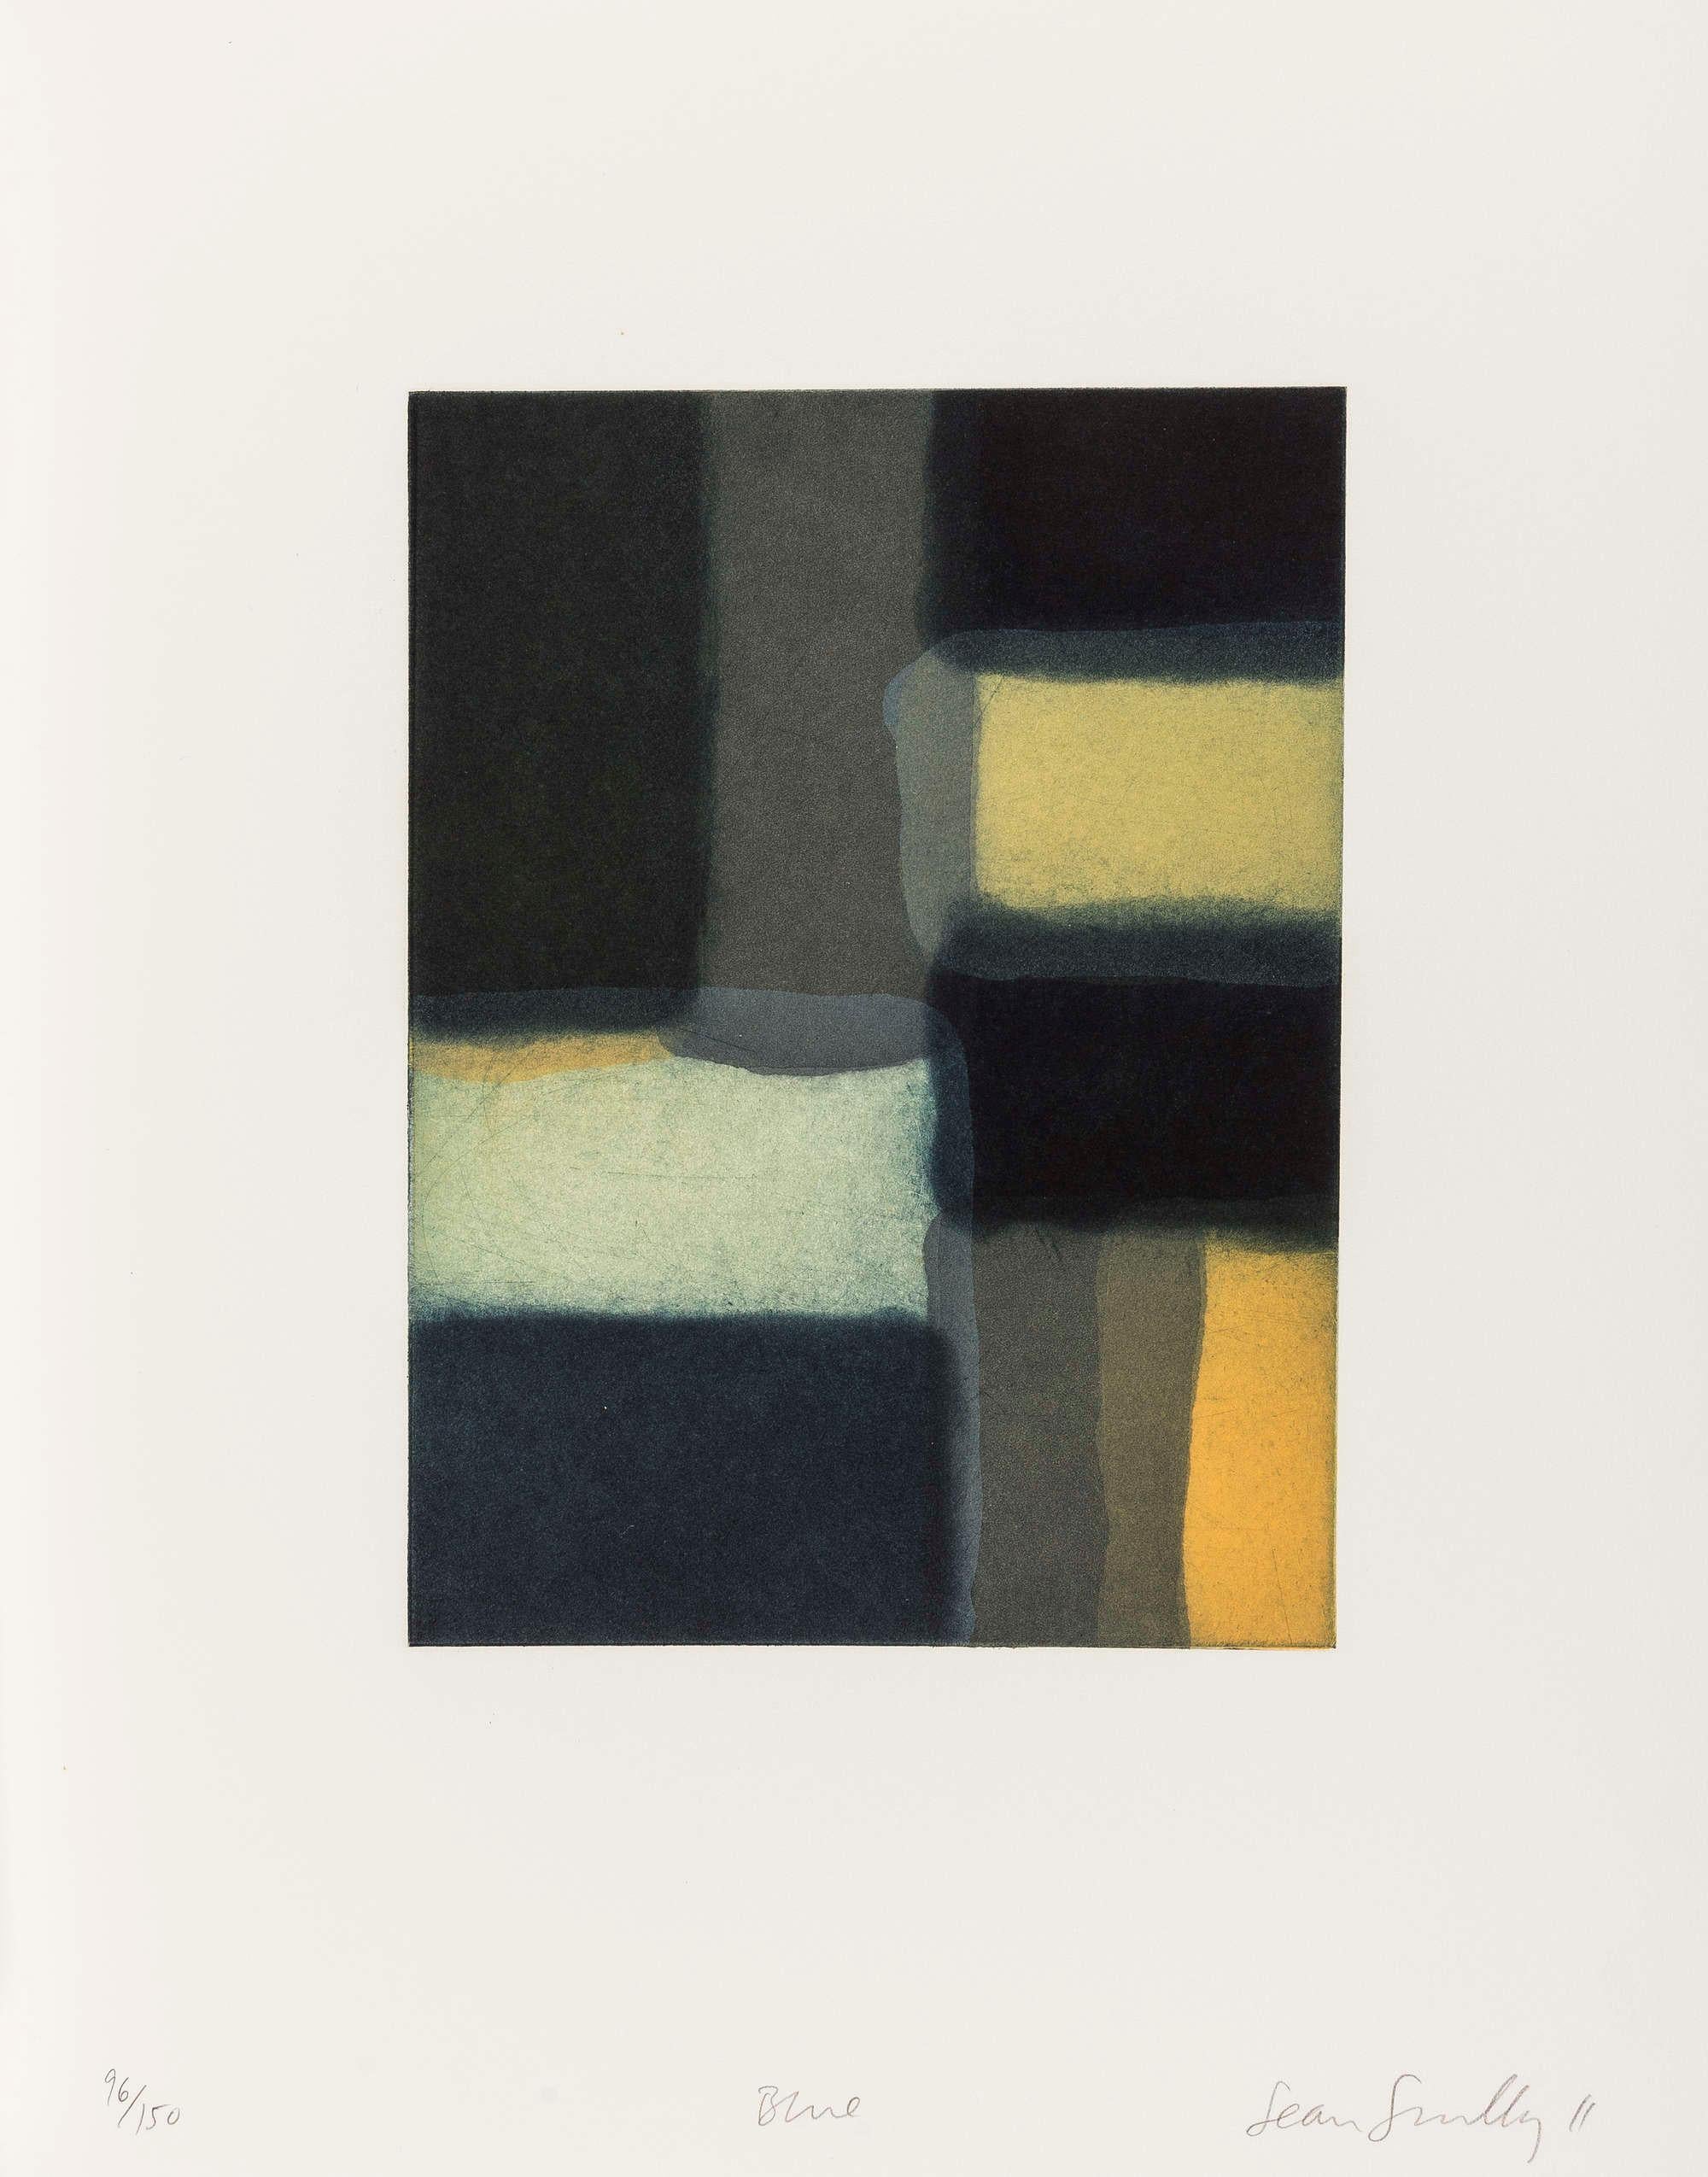 SEAN SCULLY
Blue, 2011
Etching, aquatint and spitbite, on BFK Rives paper
Signed and numbered from the edition of 150
Printed by Burnet Editions, New York
Published by Stoney Road Press, Dublin, Ireland 
Sheet: 38.1 x 29.8 cm (15.0 x 11.8 in) 